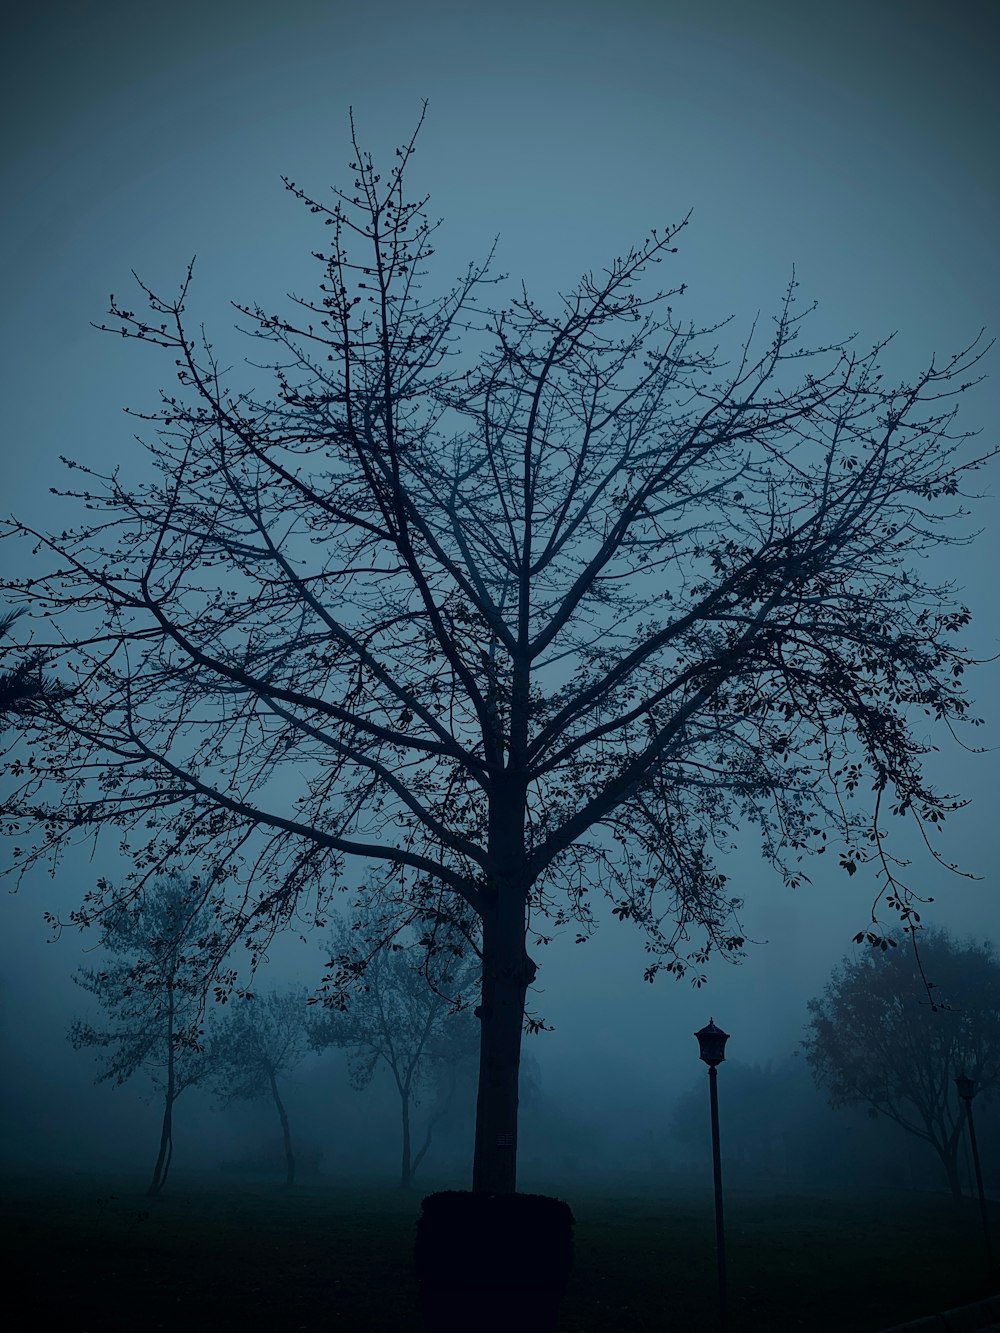 a bare tree in a park on a foggy day